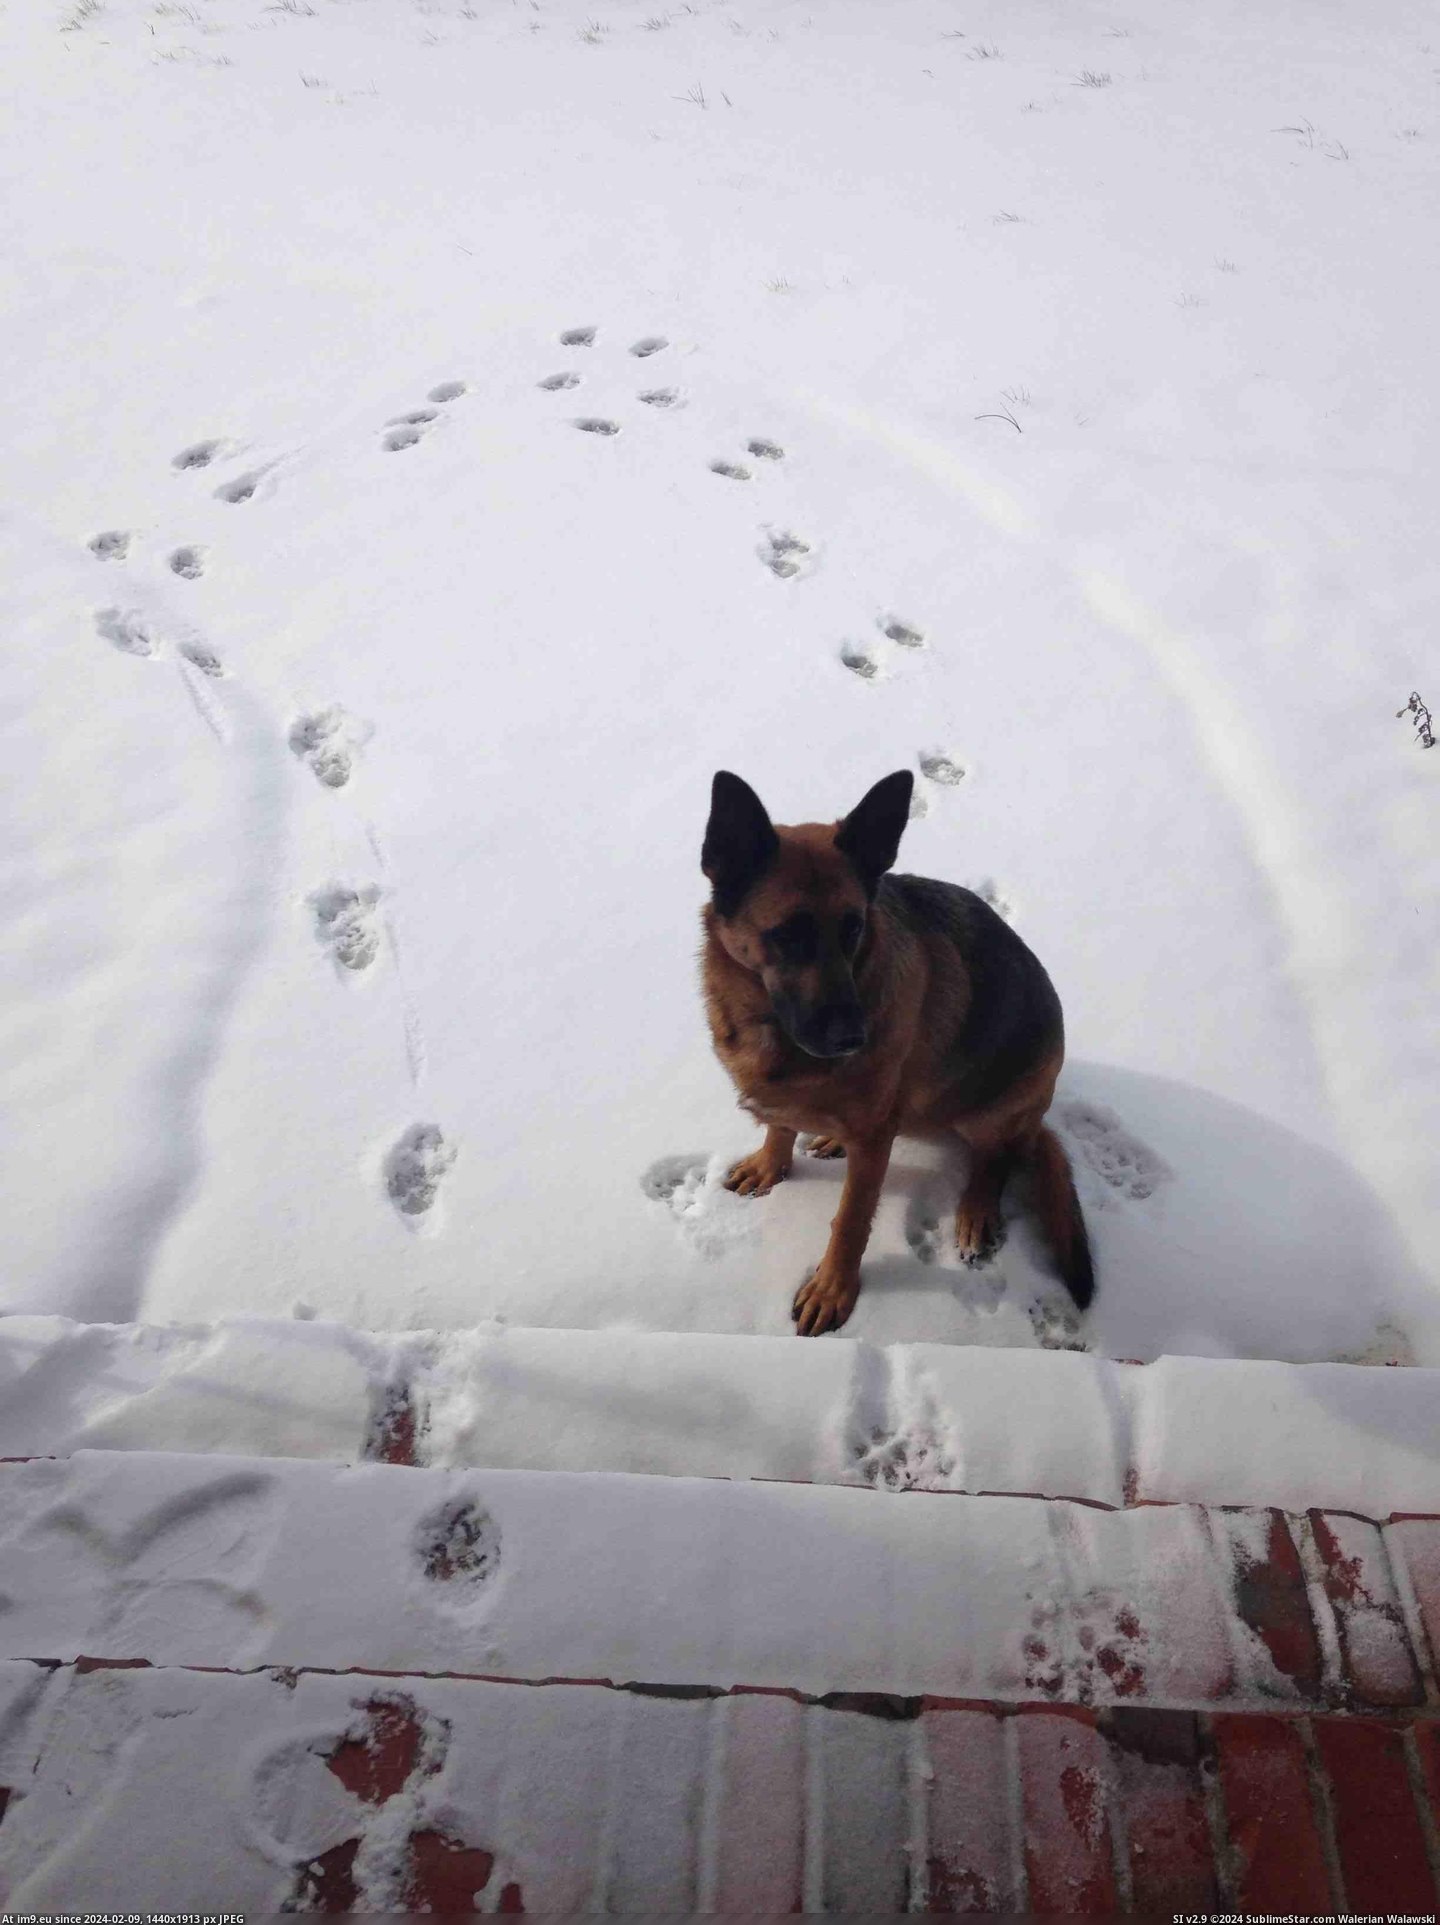 #Time #Dog #Instant #Snow #Nope [Aww] my dog's first time seeing snow....instant 'NOPE' Pic. (Image of album My r/AWW favs))